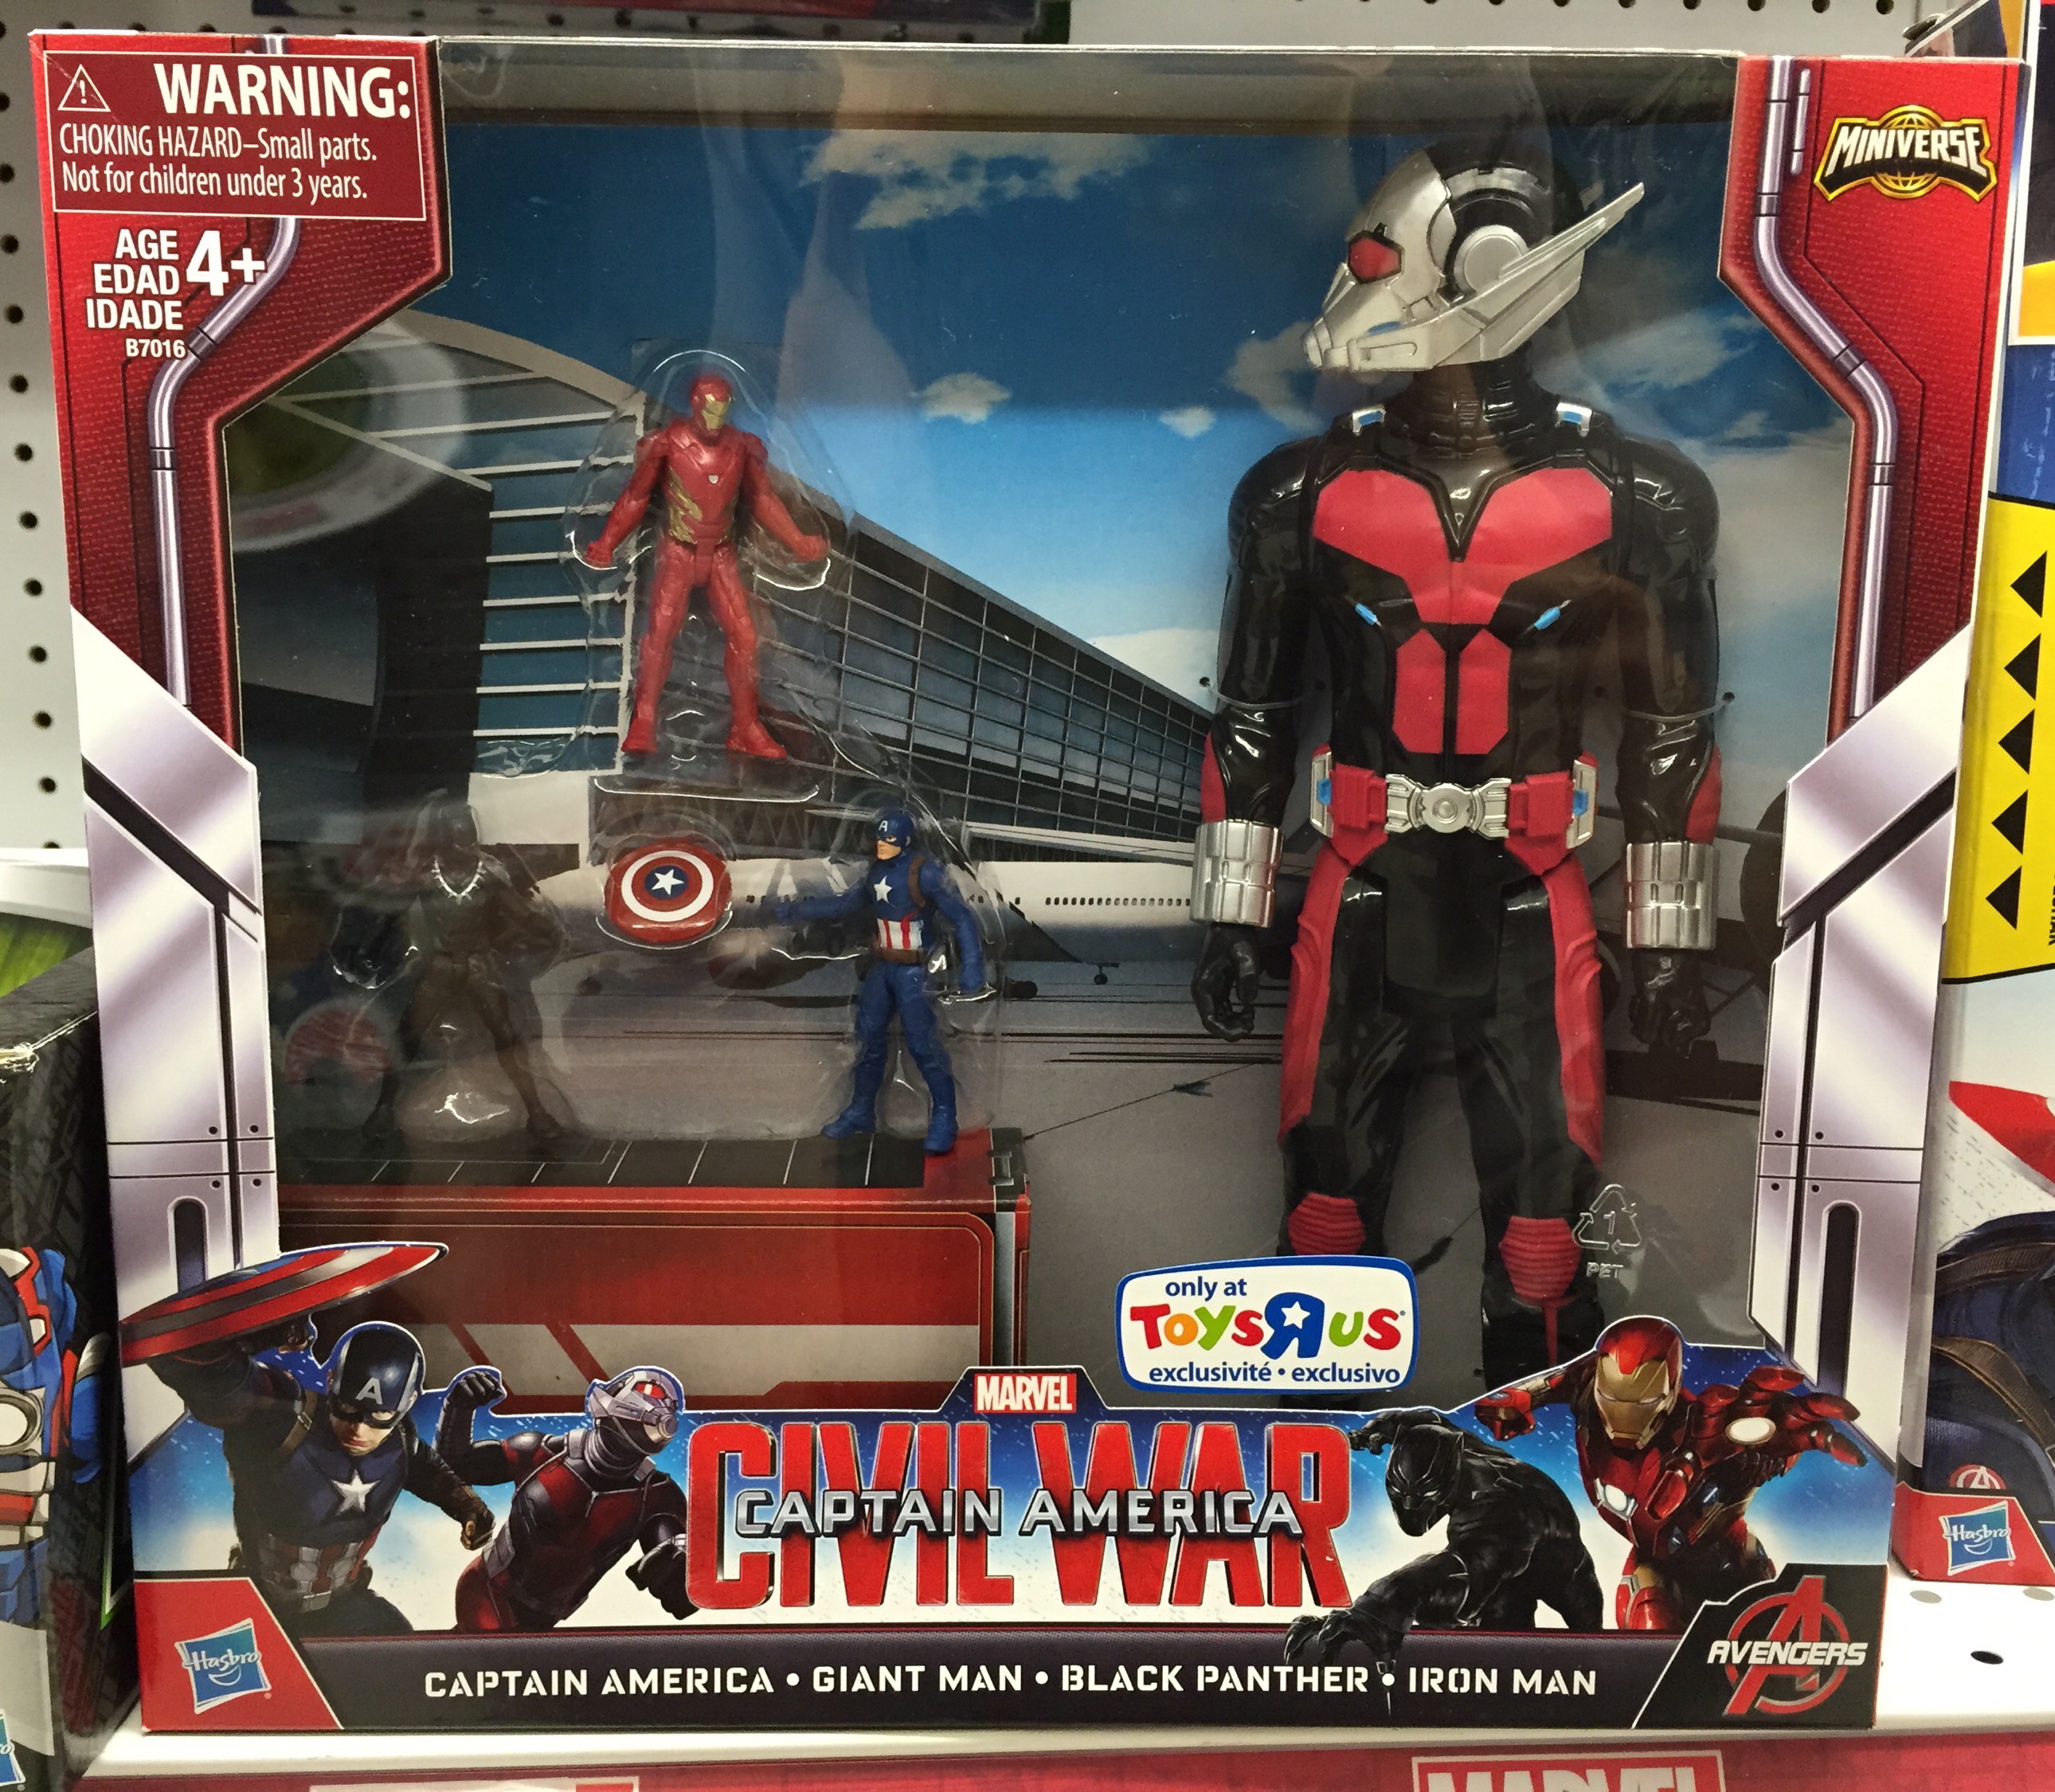 + GIANT MAN Black Panther Details about   2015 Hasbro Marvel CIVIL WAR Toys R Us exclusive 